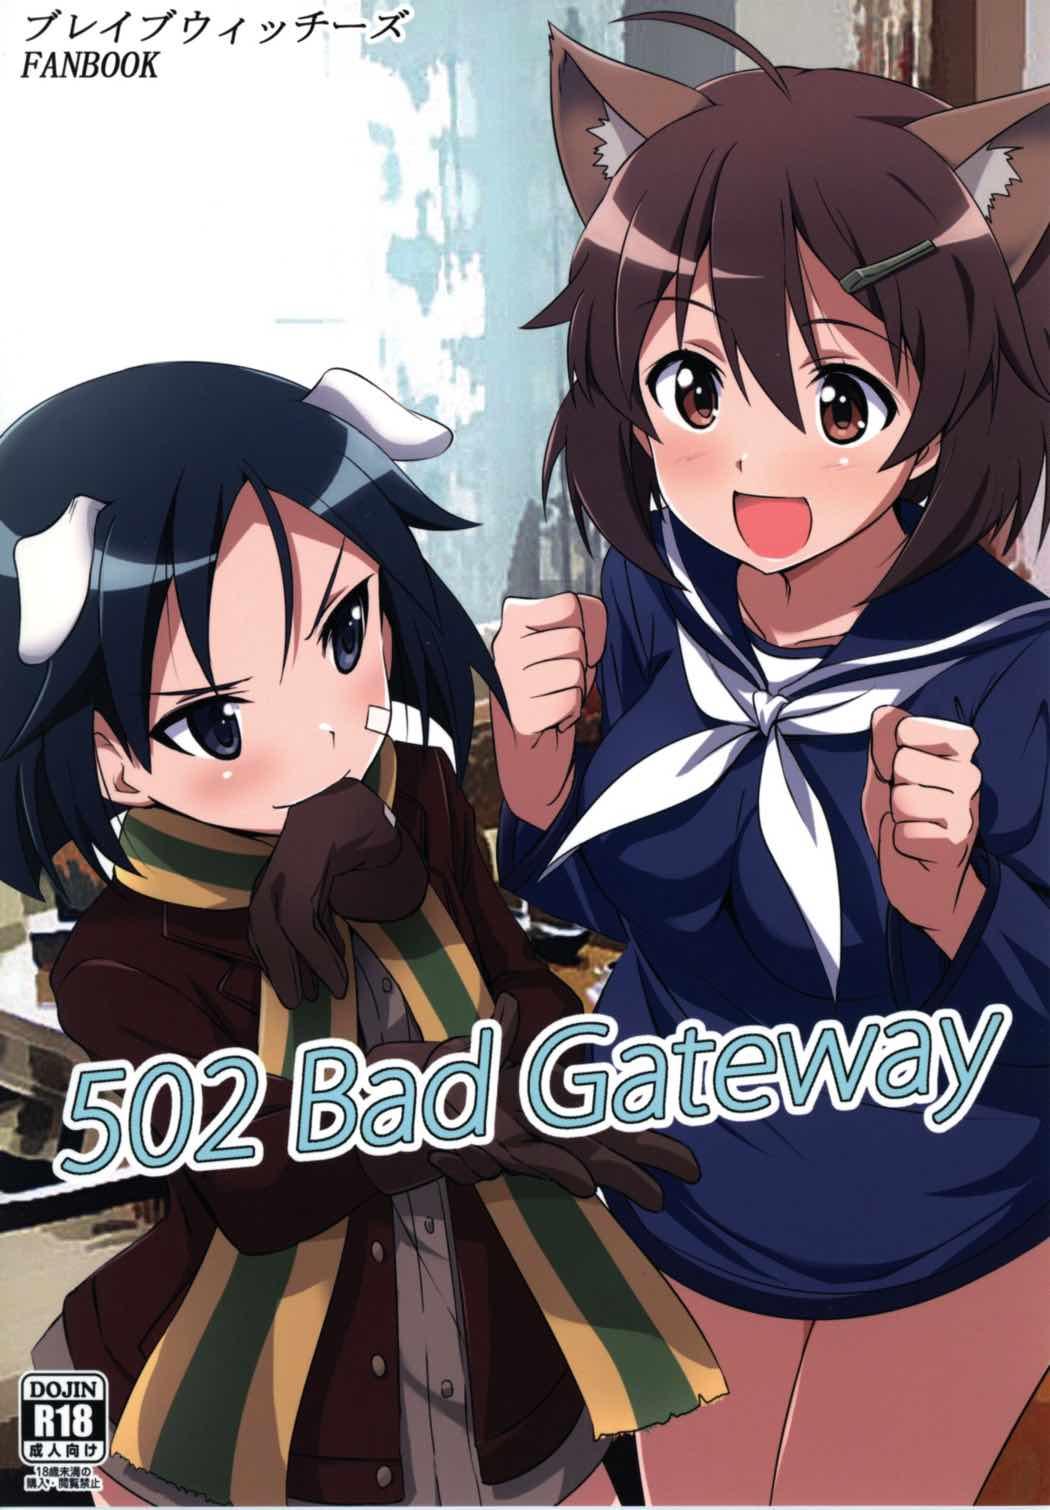 Tinder 502 Bad Gateway - Brave witches Free Blowjobs - Picture 1